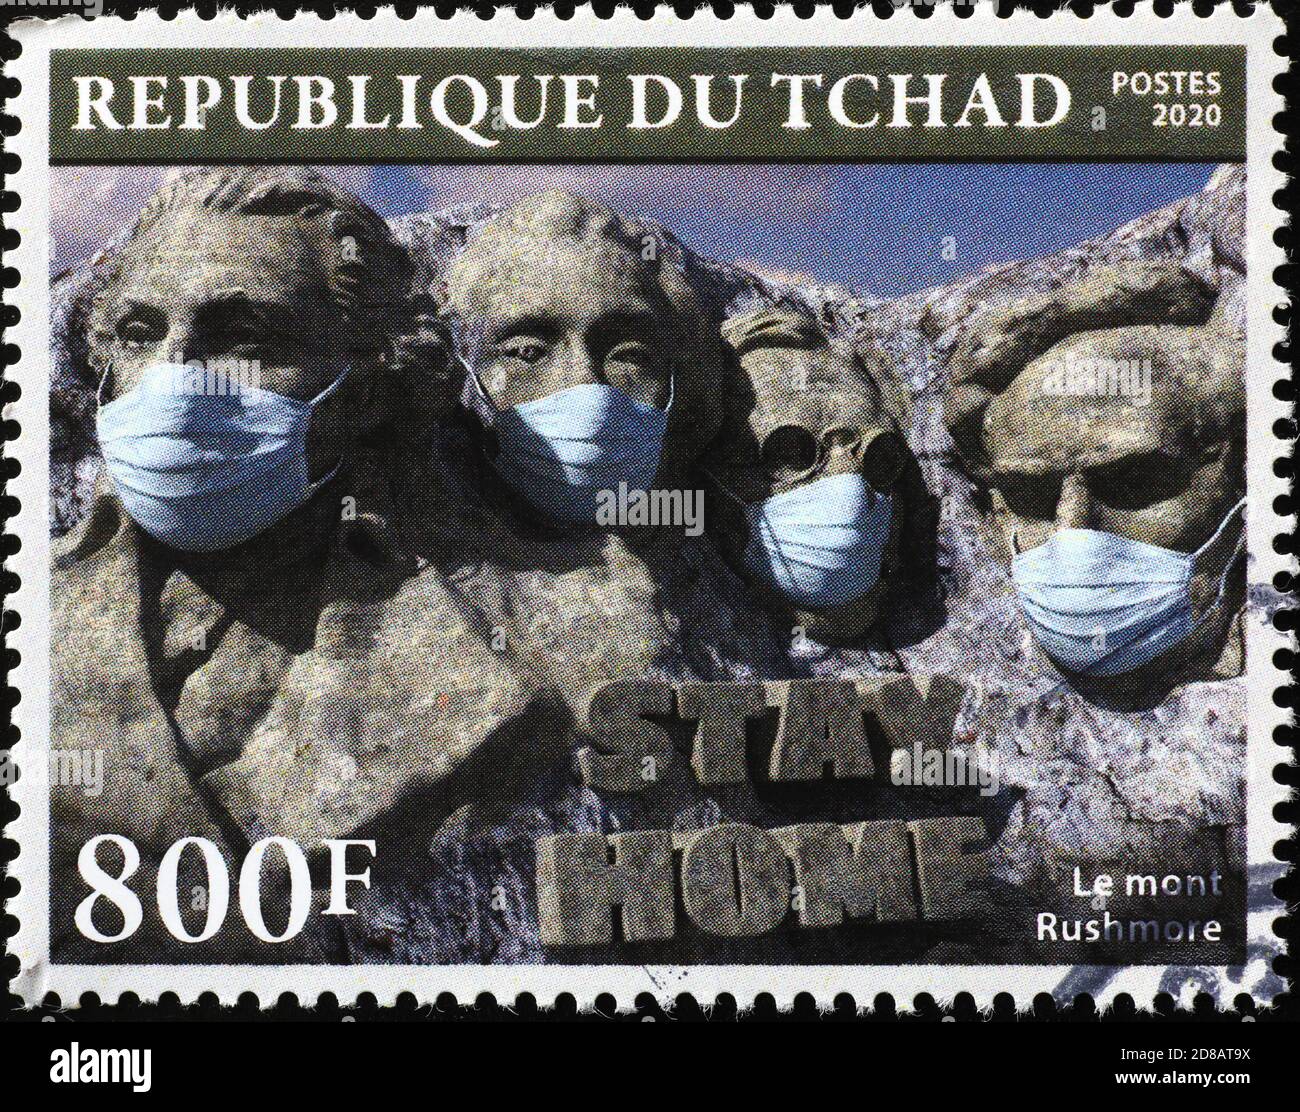 The presidents of Mount Rushmore with antivirus masks on stamp. Image of the statues wearing the mask. Stock Photo